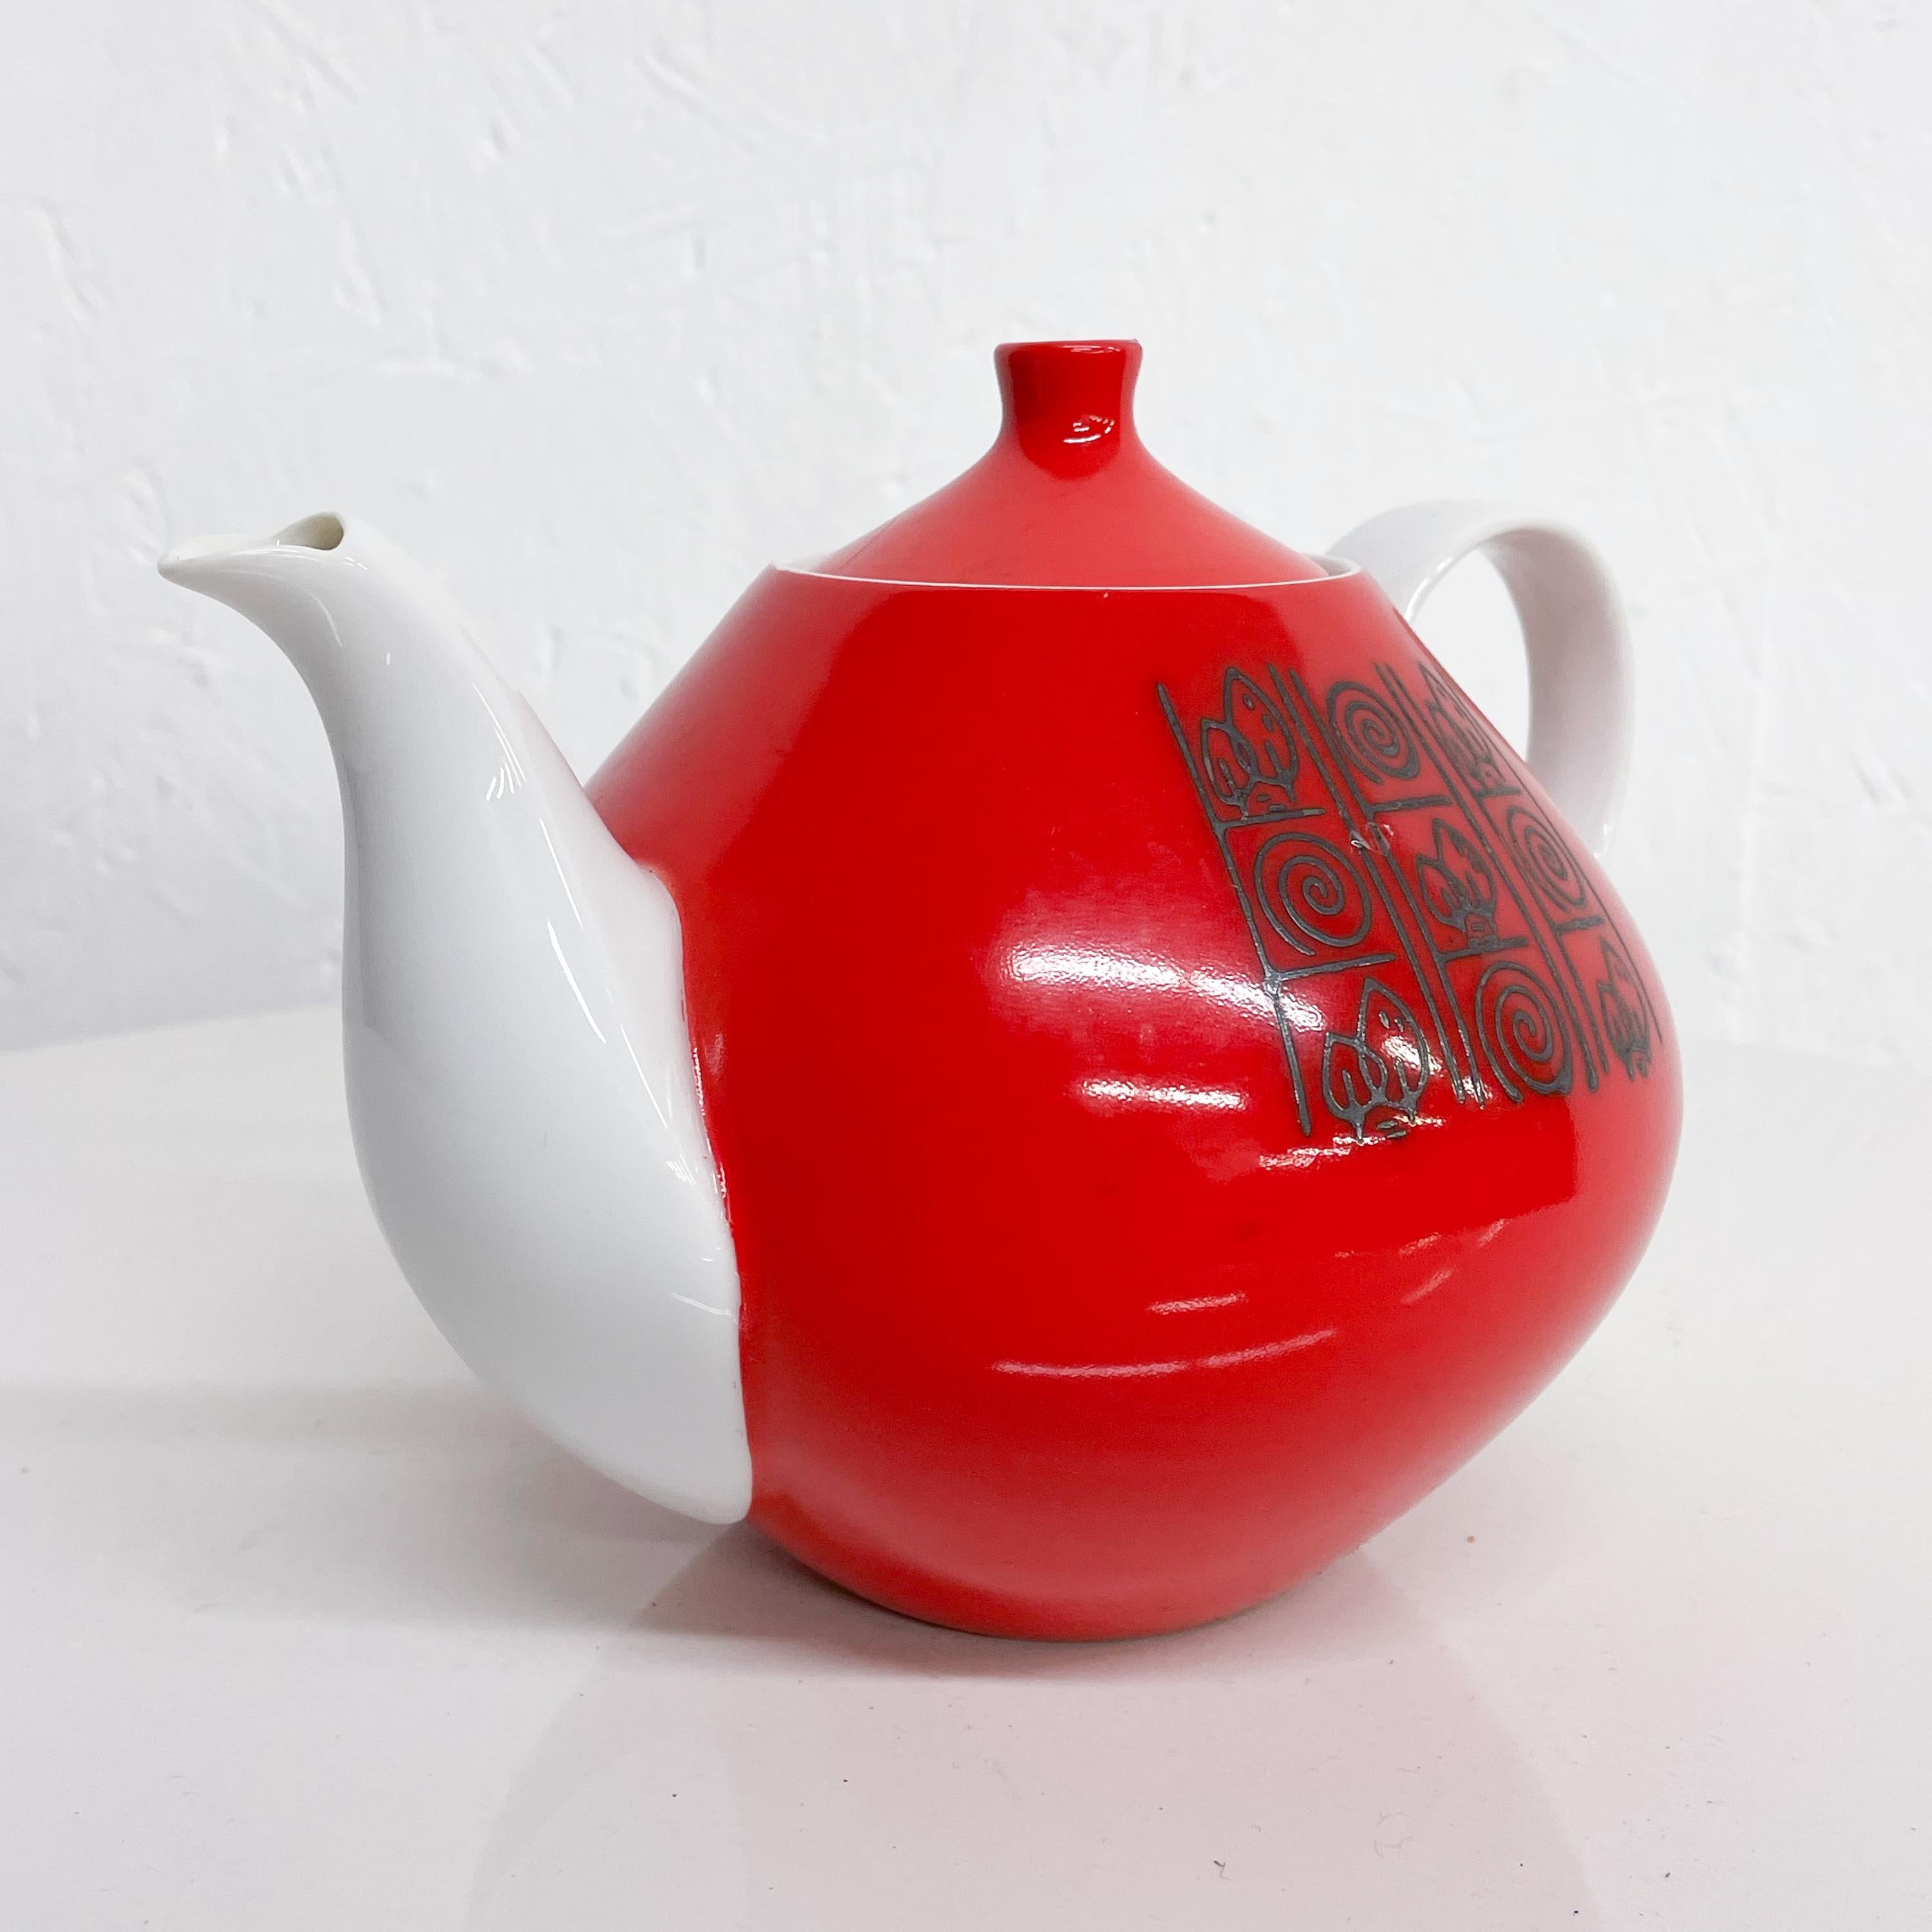 Perky red tea pot vintage modern yamaka China from Japan 
Lovely design in red black and white
Measures: 5.75 Tall x 8.5 D x 5.75 W diameter
Selling as is vintage preowned unrestored used condition. See images please.
 